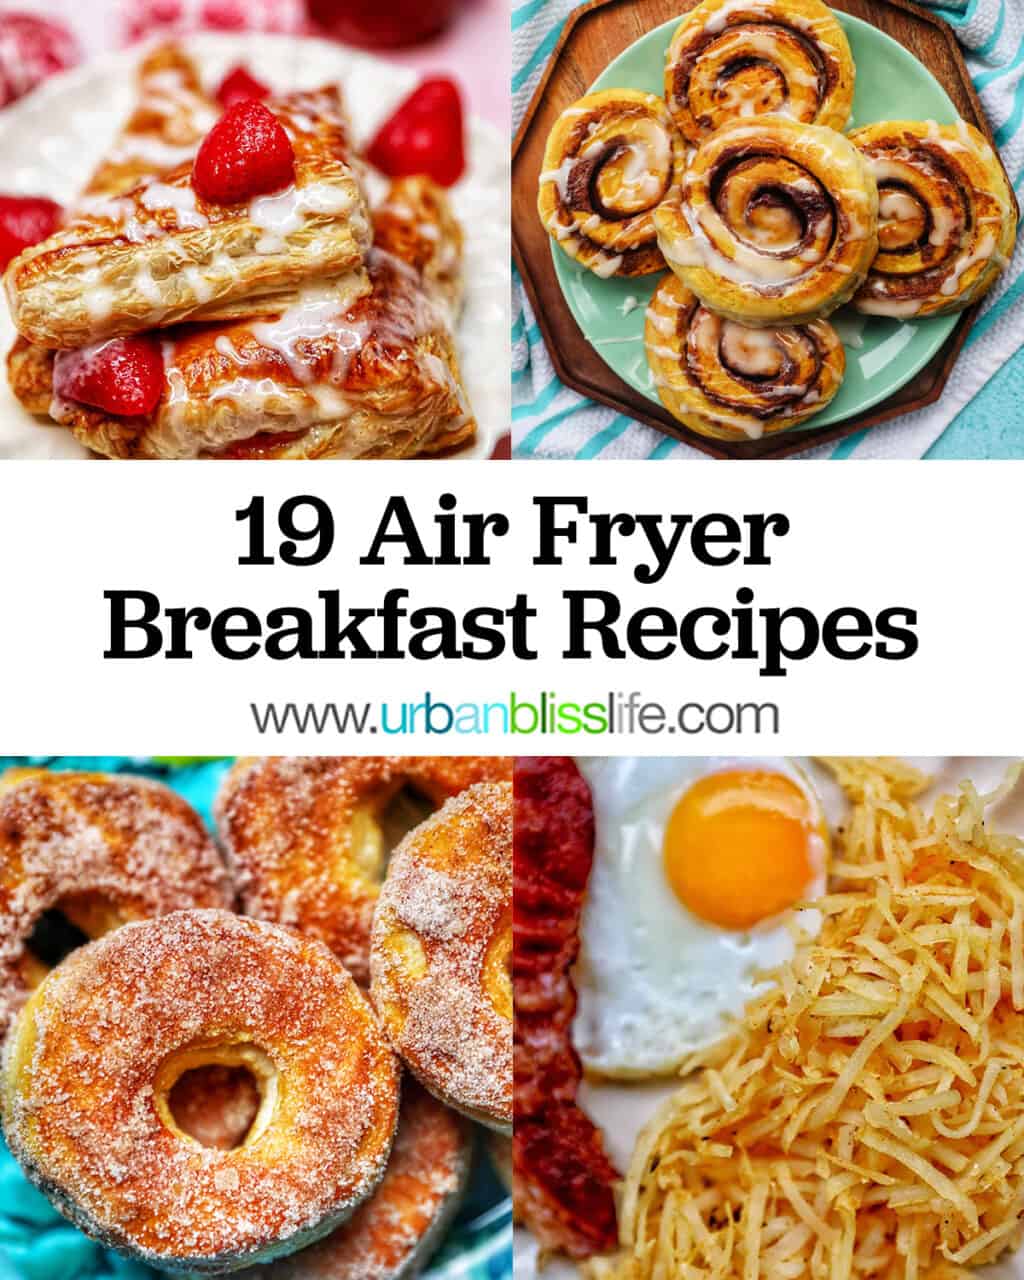 19 air fryer breakfast recipes photo collage.